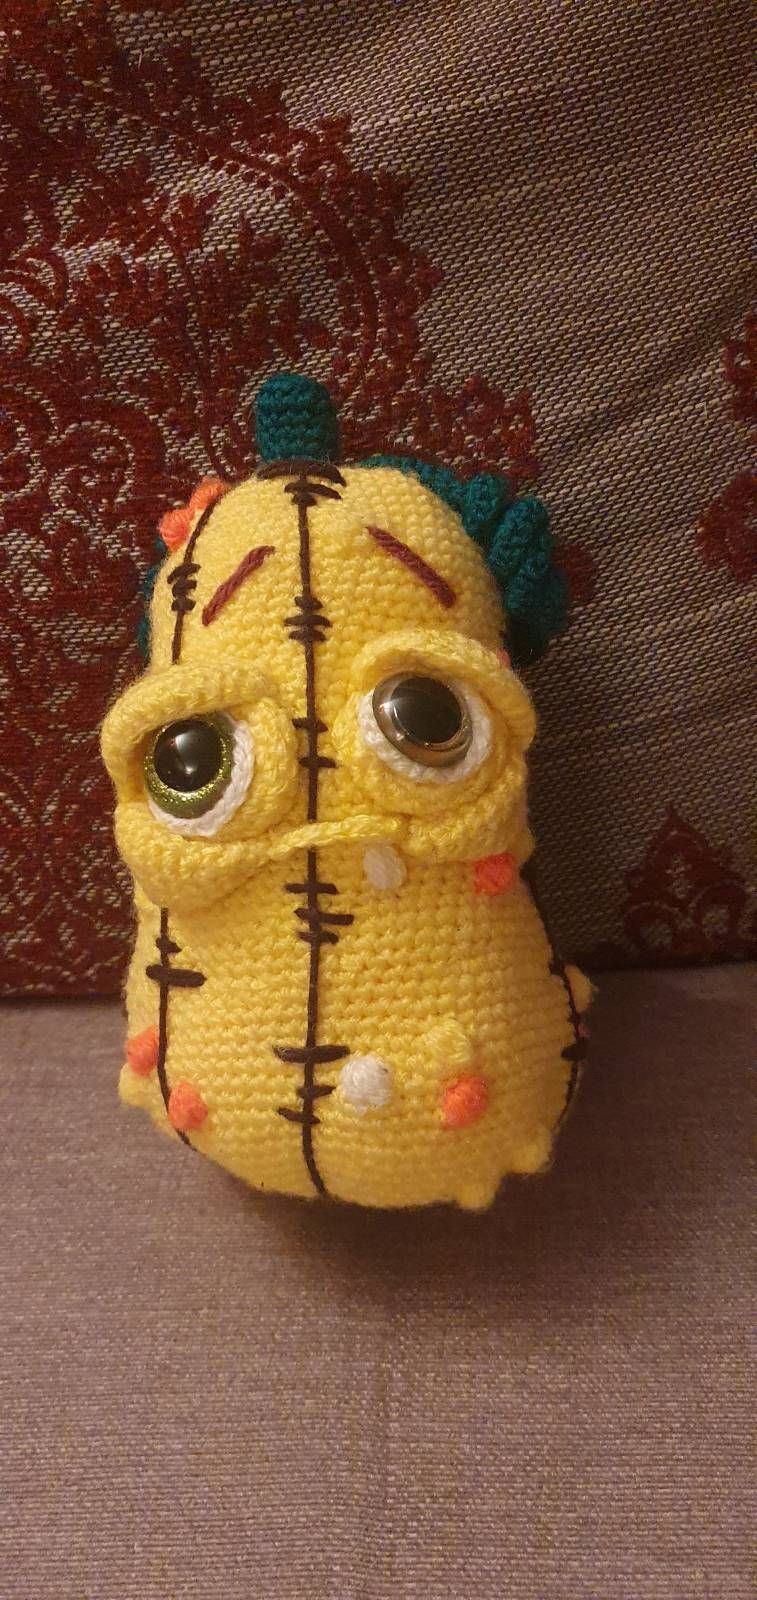 Crochet Amigurumi Squash Pattern Review by Rhona Day for Cottontail & Whiskers